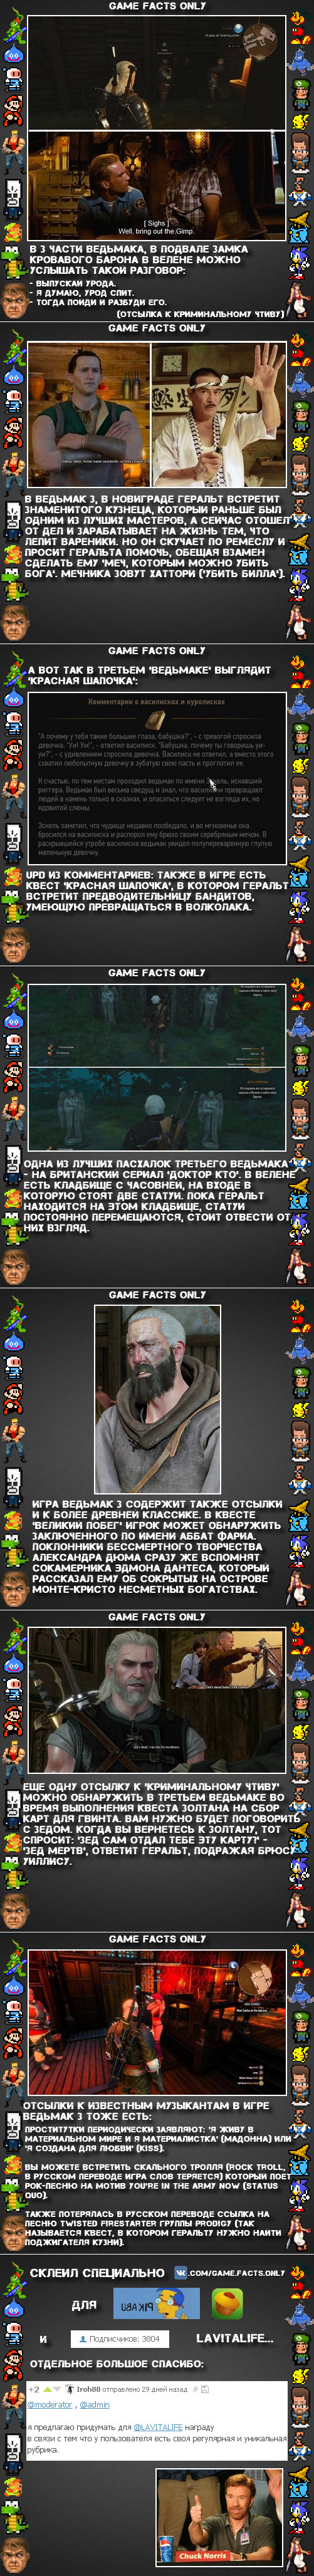    ( LXIV) , , , Game facts only, Lavitalife,  3:  